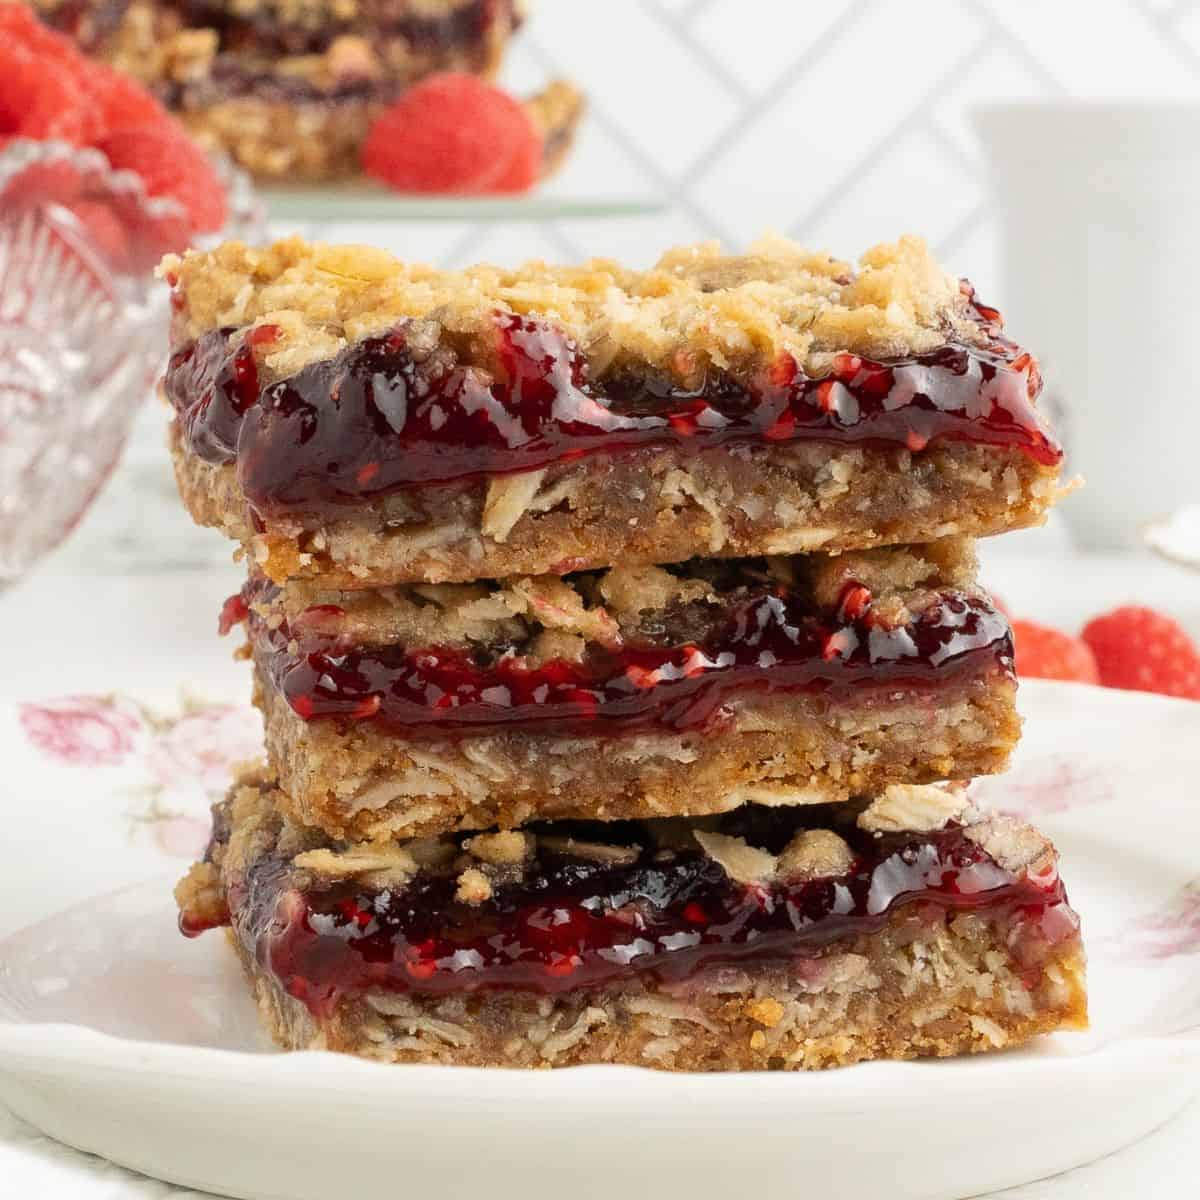 Raspberry Oatmeal Bars- A simple and delicious dessert bar recipe made with oats and raspberry preserves with no added sugar.